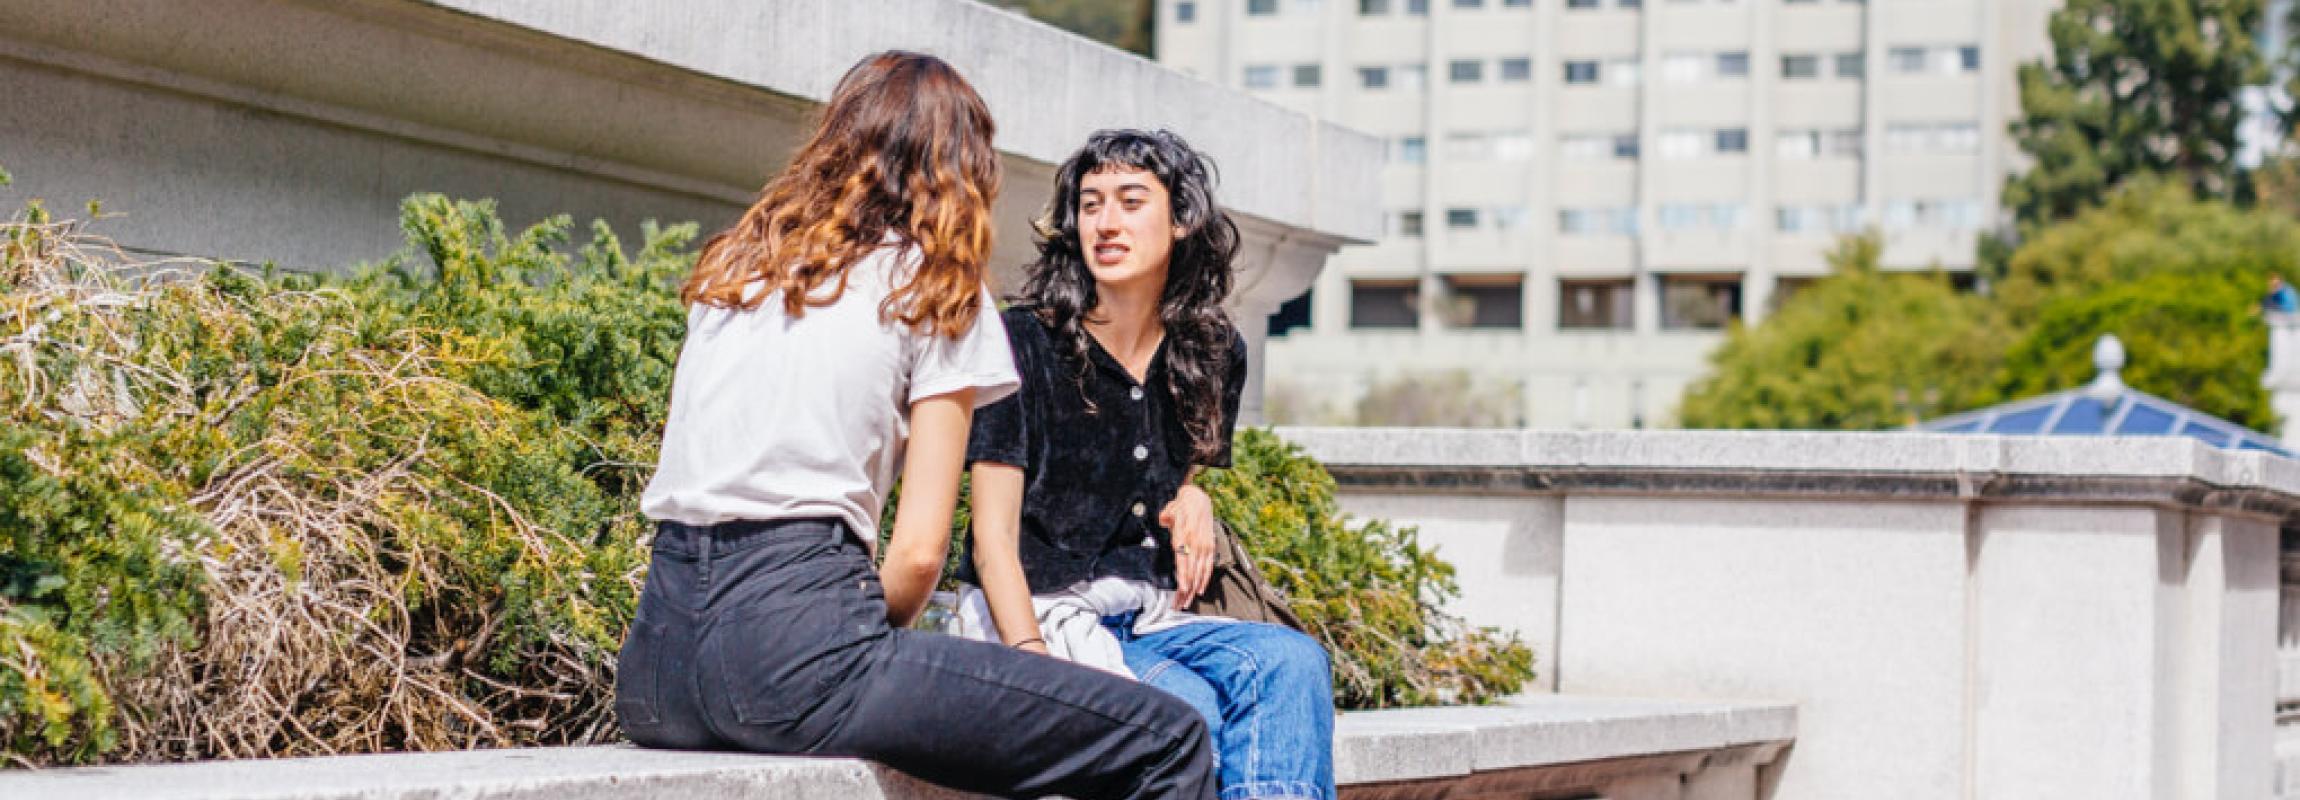 Photo of two female students sitting outside having a conversation